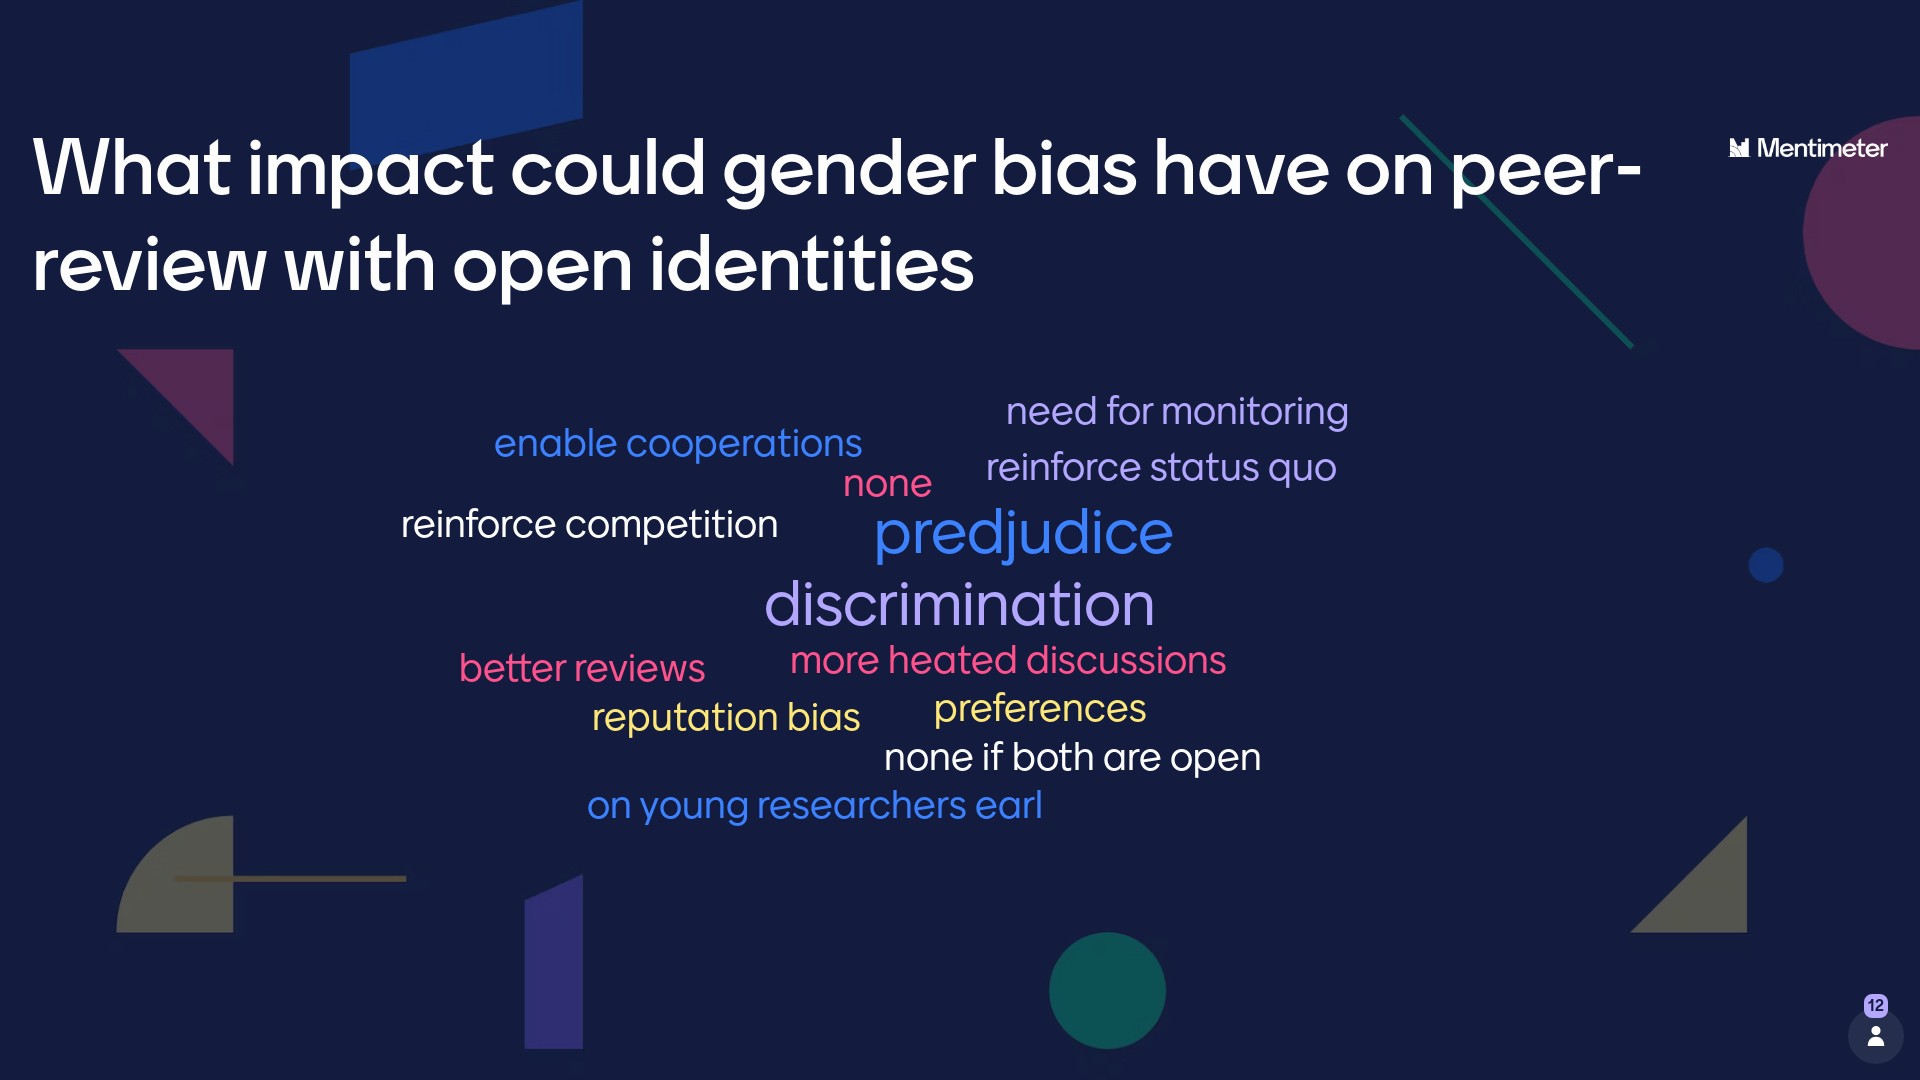 What impact could gender bias have on peer-review with open identities?